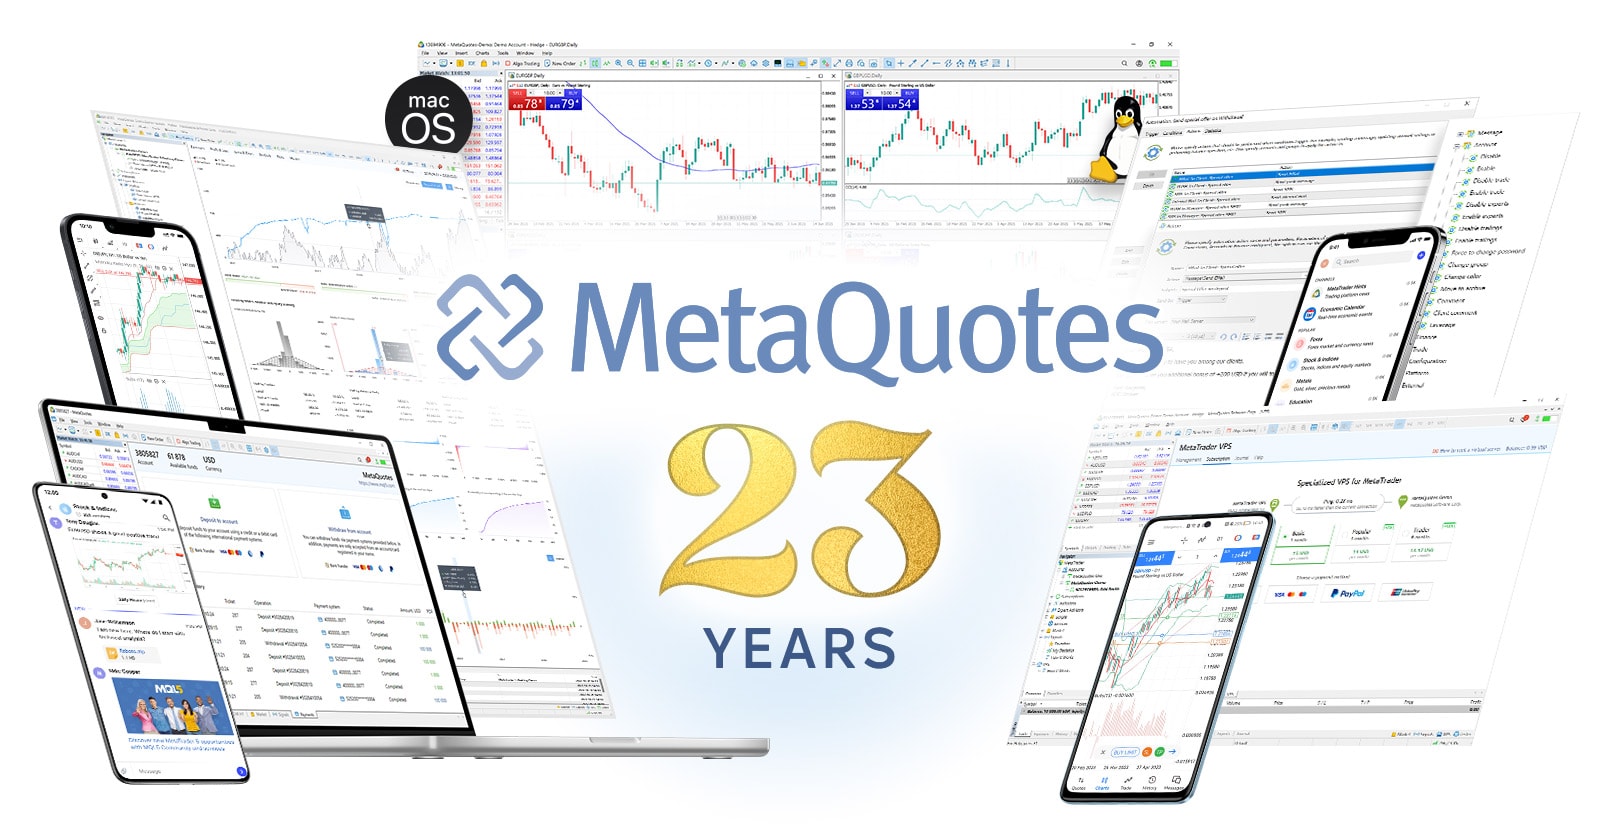 MetaQuotes becomes 23!